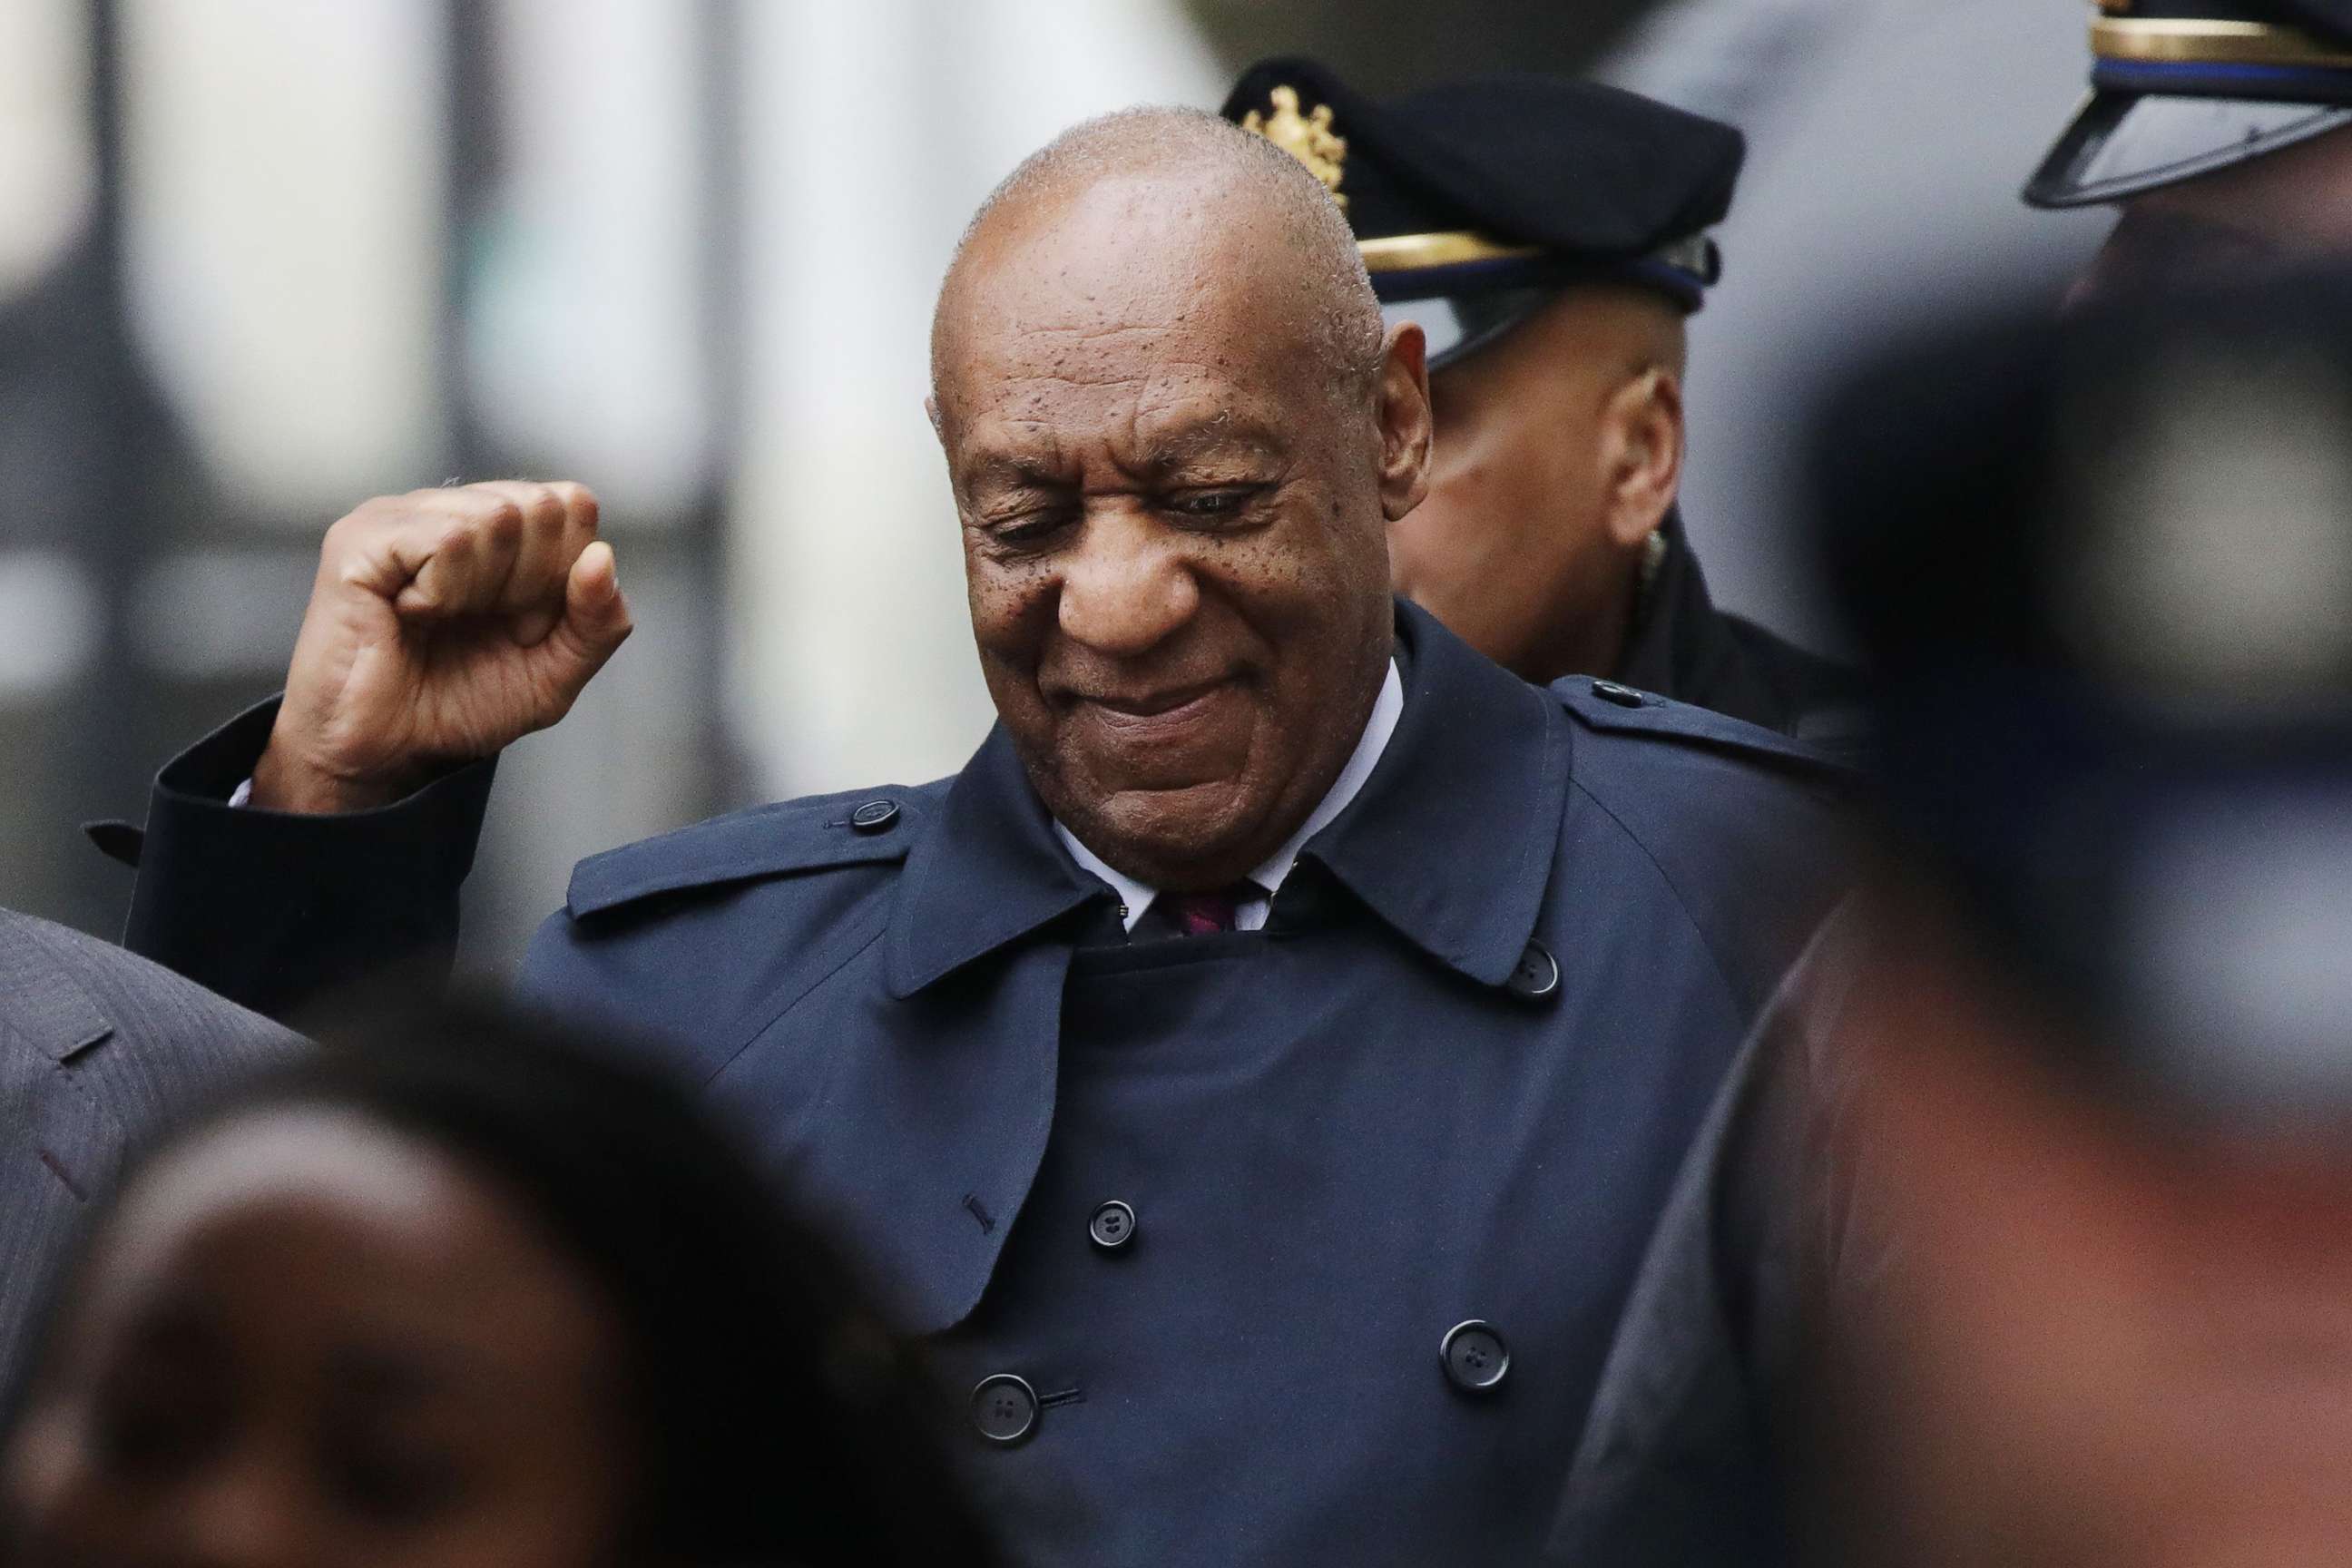 PHOTO: Actor and comedian Bill Cosby arrives for the start of jury deliberations in the retrial of his sexual assault case at the Montgomery County Courthouse in Norristown, Pa., April 25, 2018.